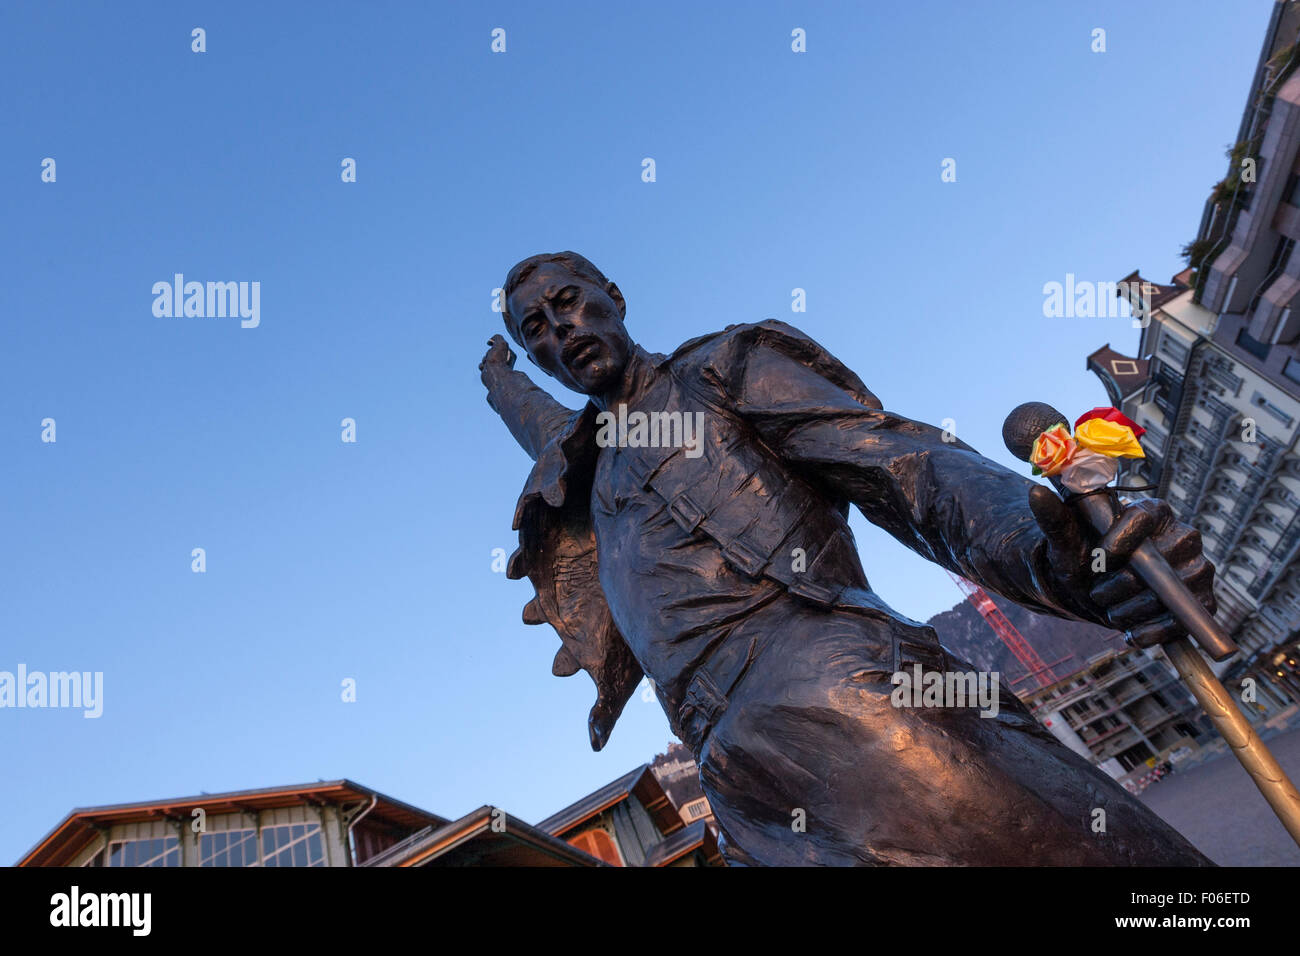 Freddie Mercury statue, with holding flowers, by the Czech artist Irena Sedlecka, on Market Square facing  Lake Geneva. Montreux Stock Photo